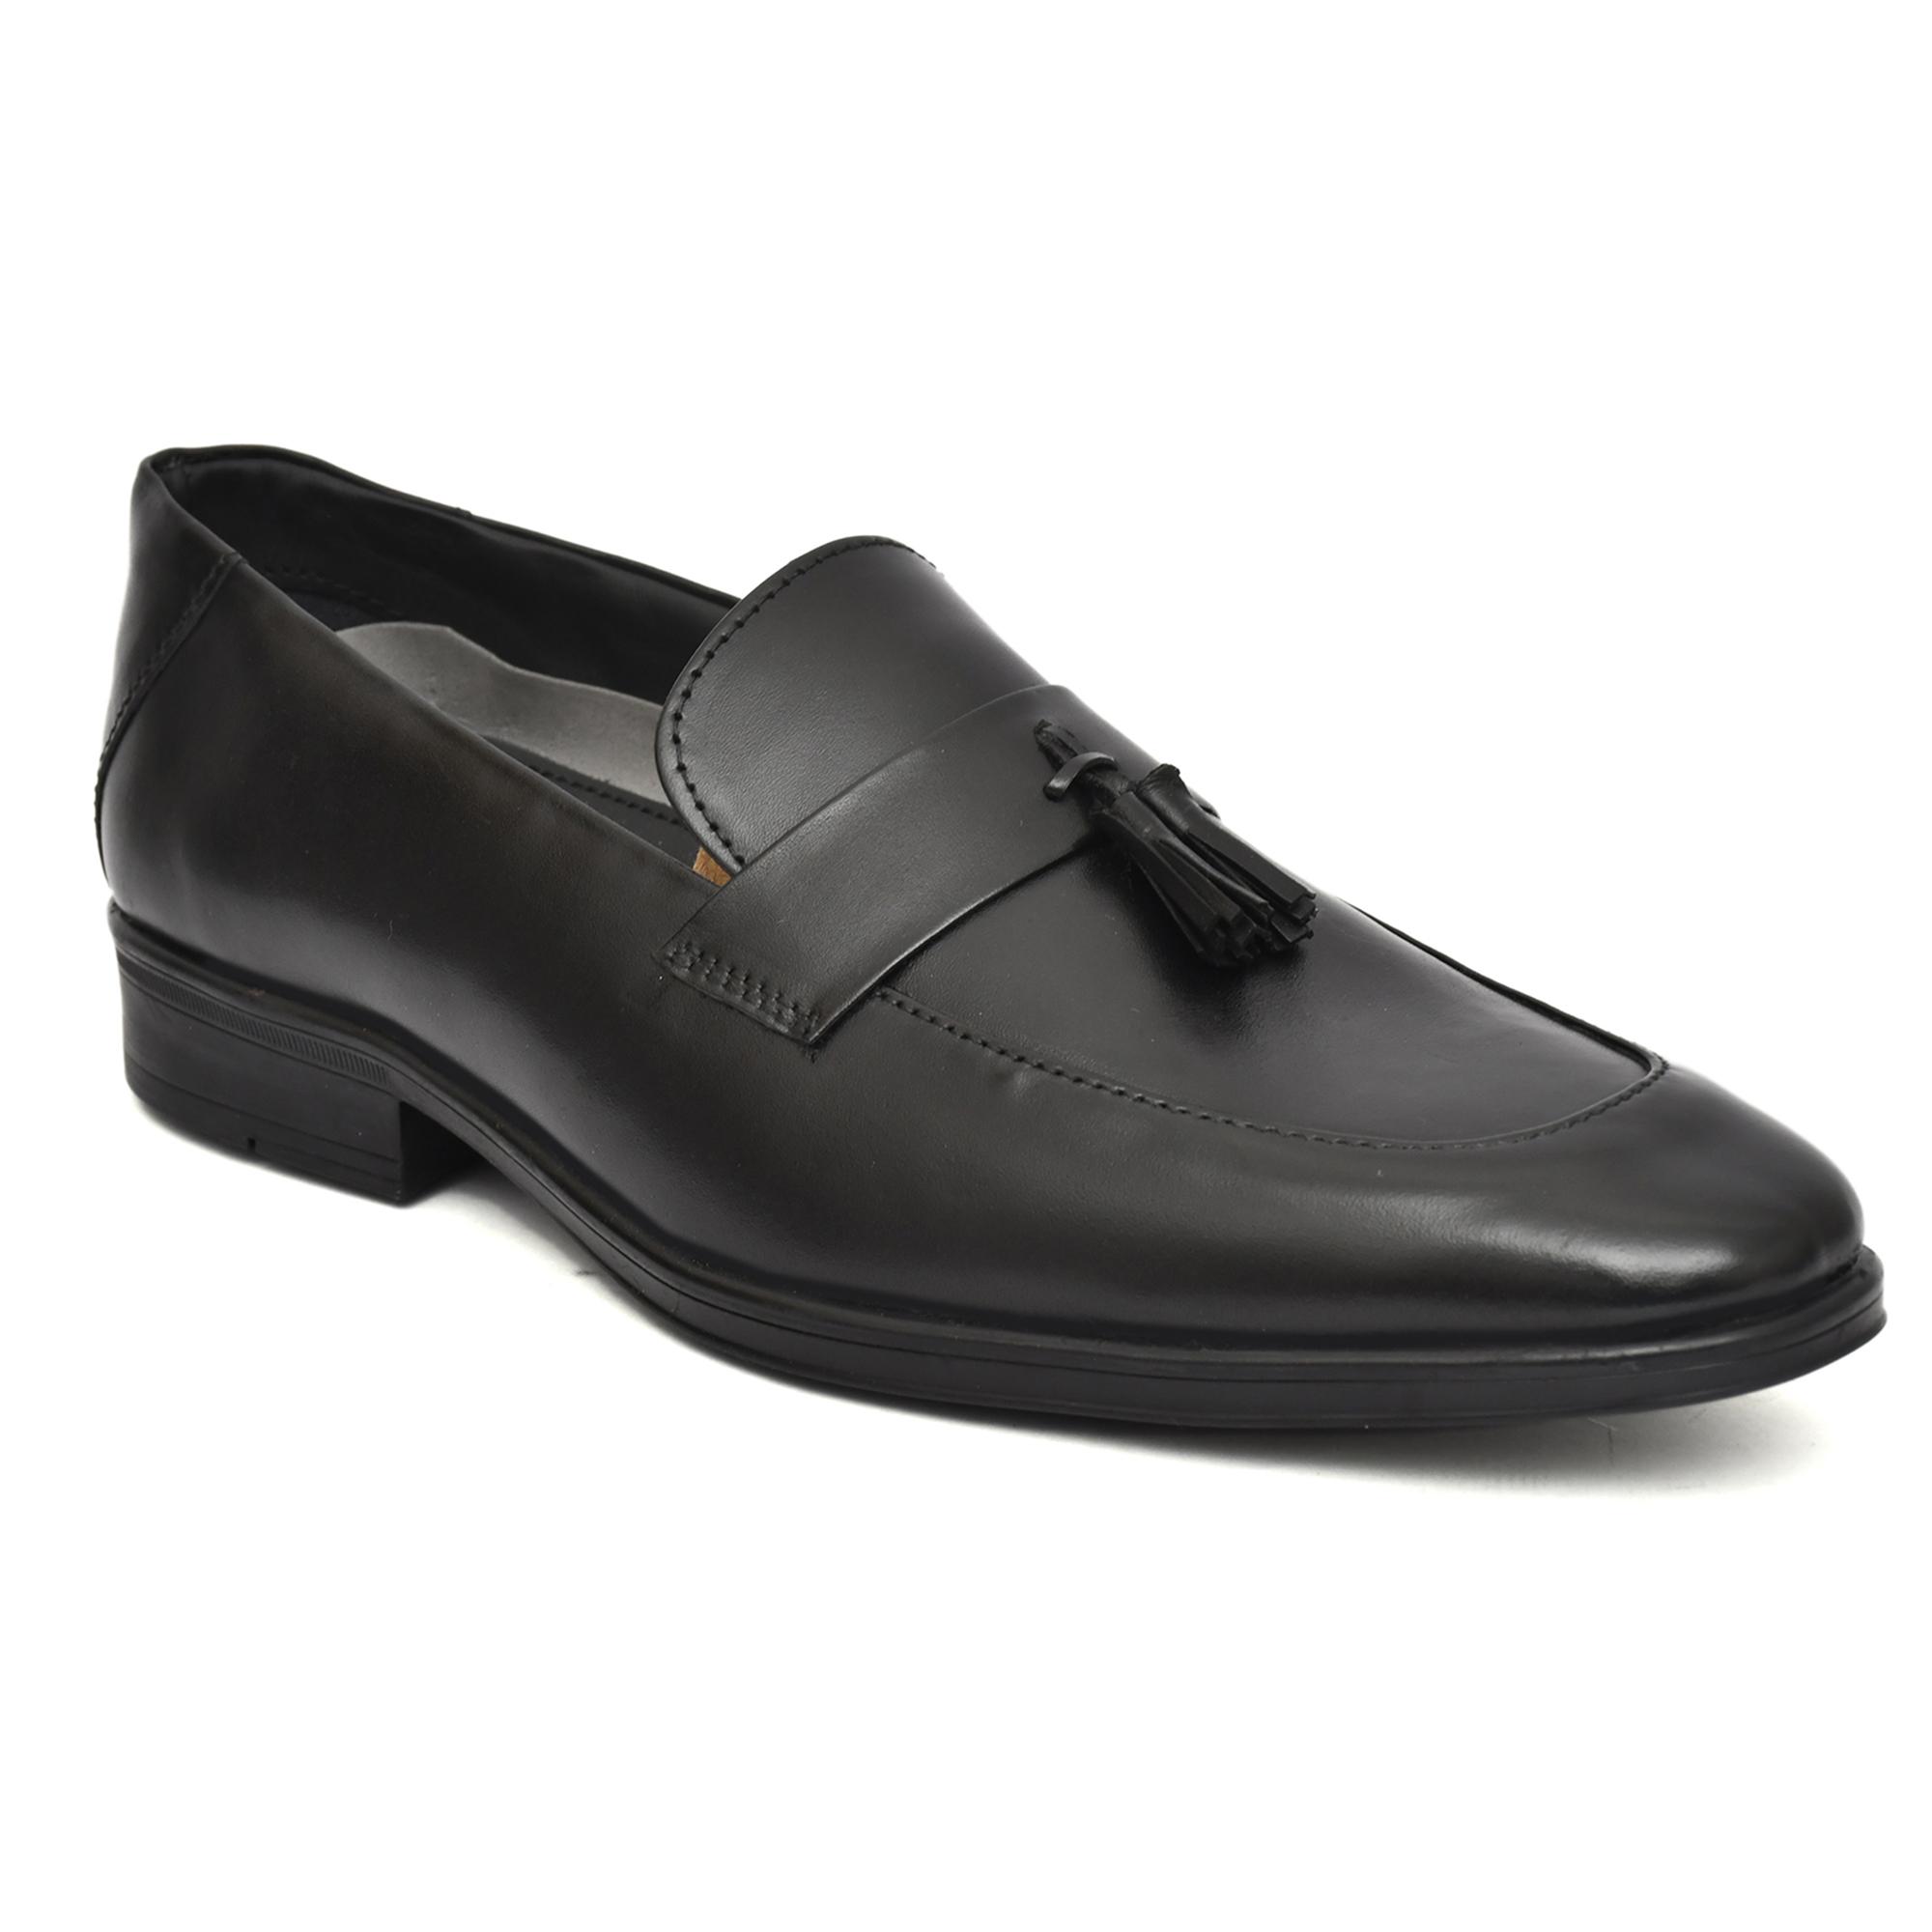 Black leather Penny Loafers with Tassel for men with Memory foam footpad by asm.